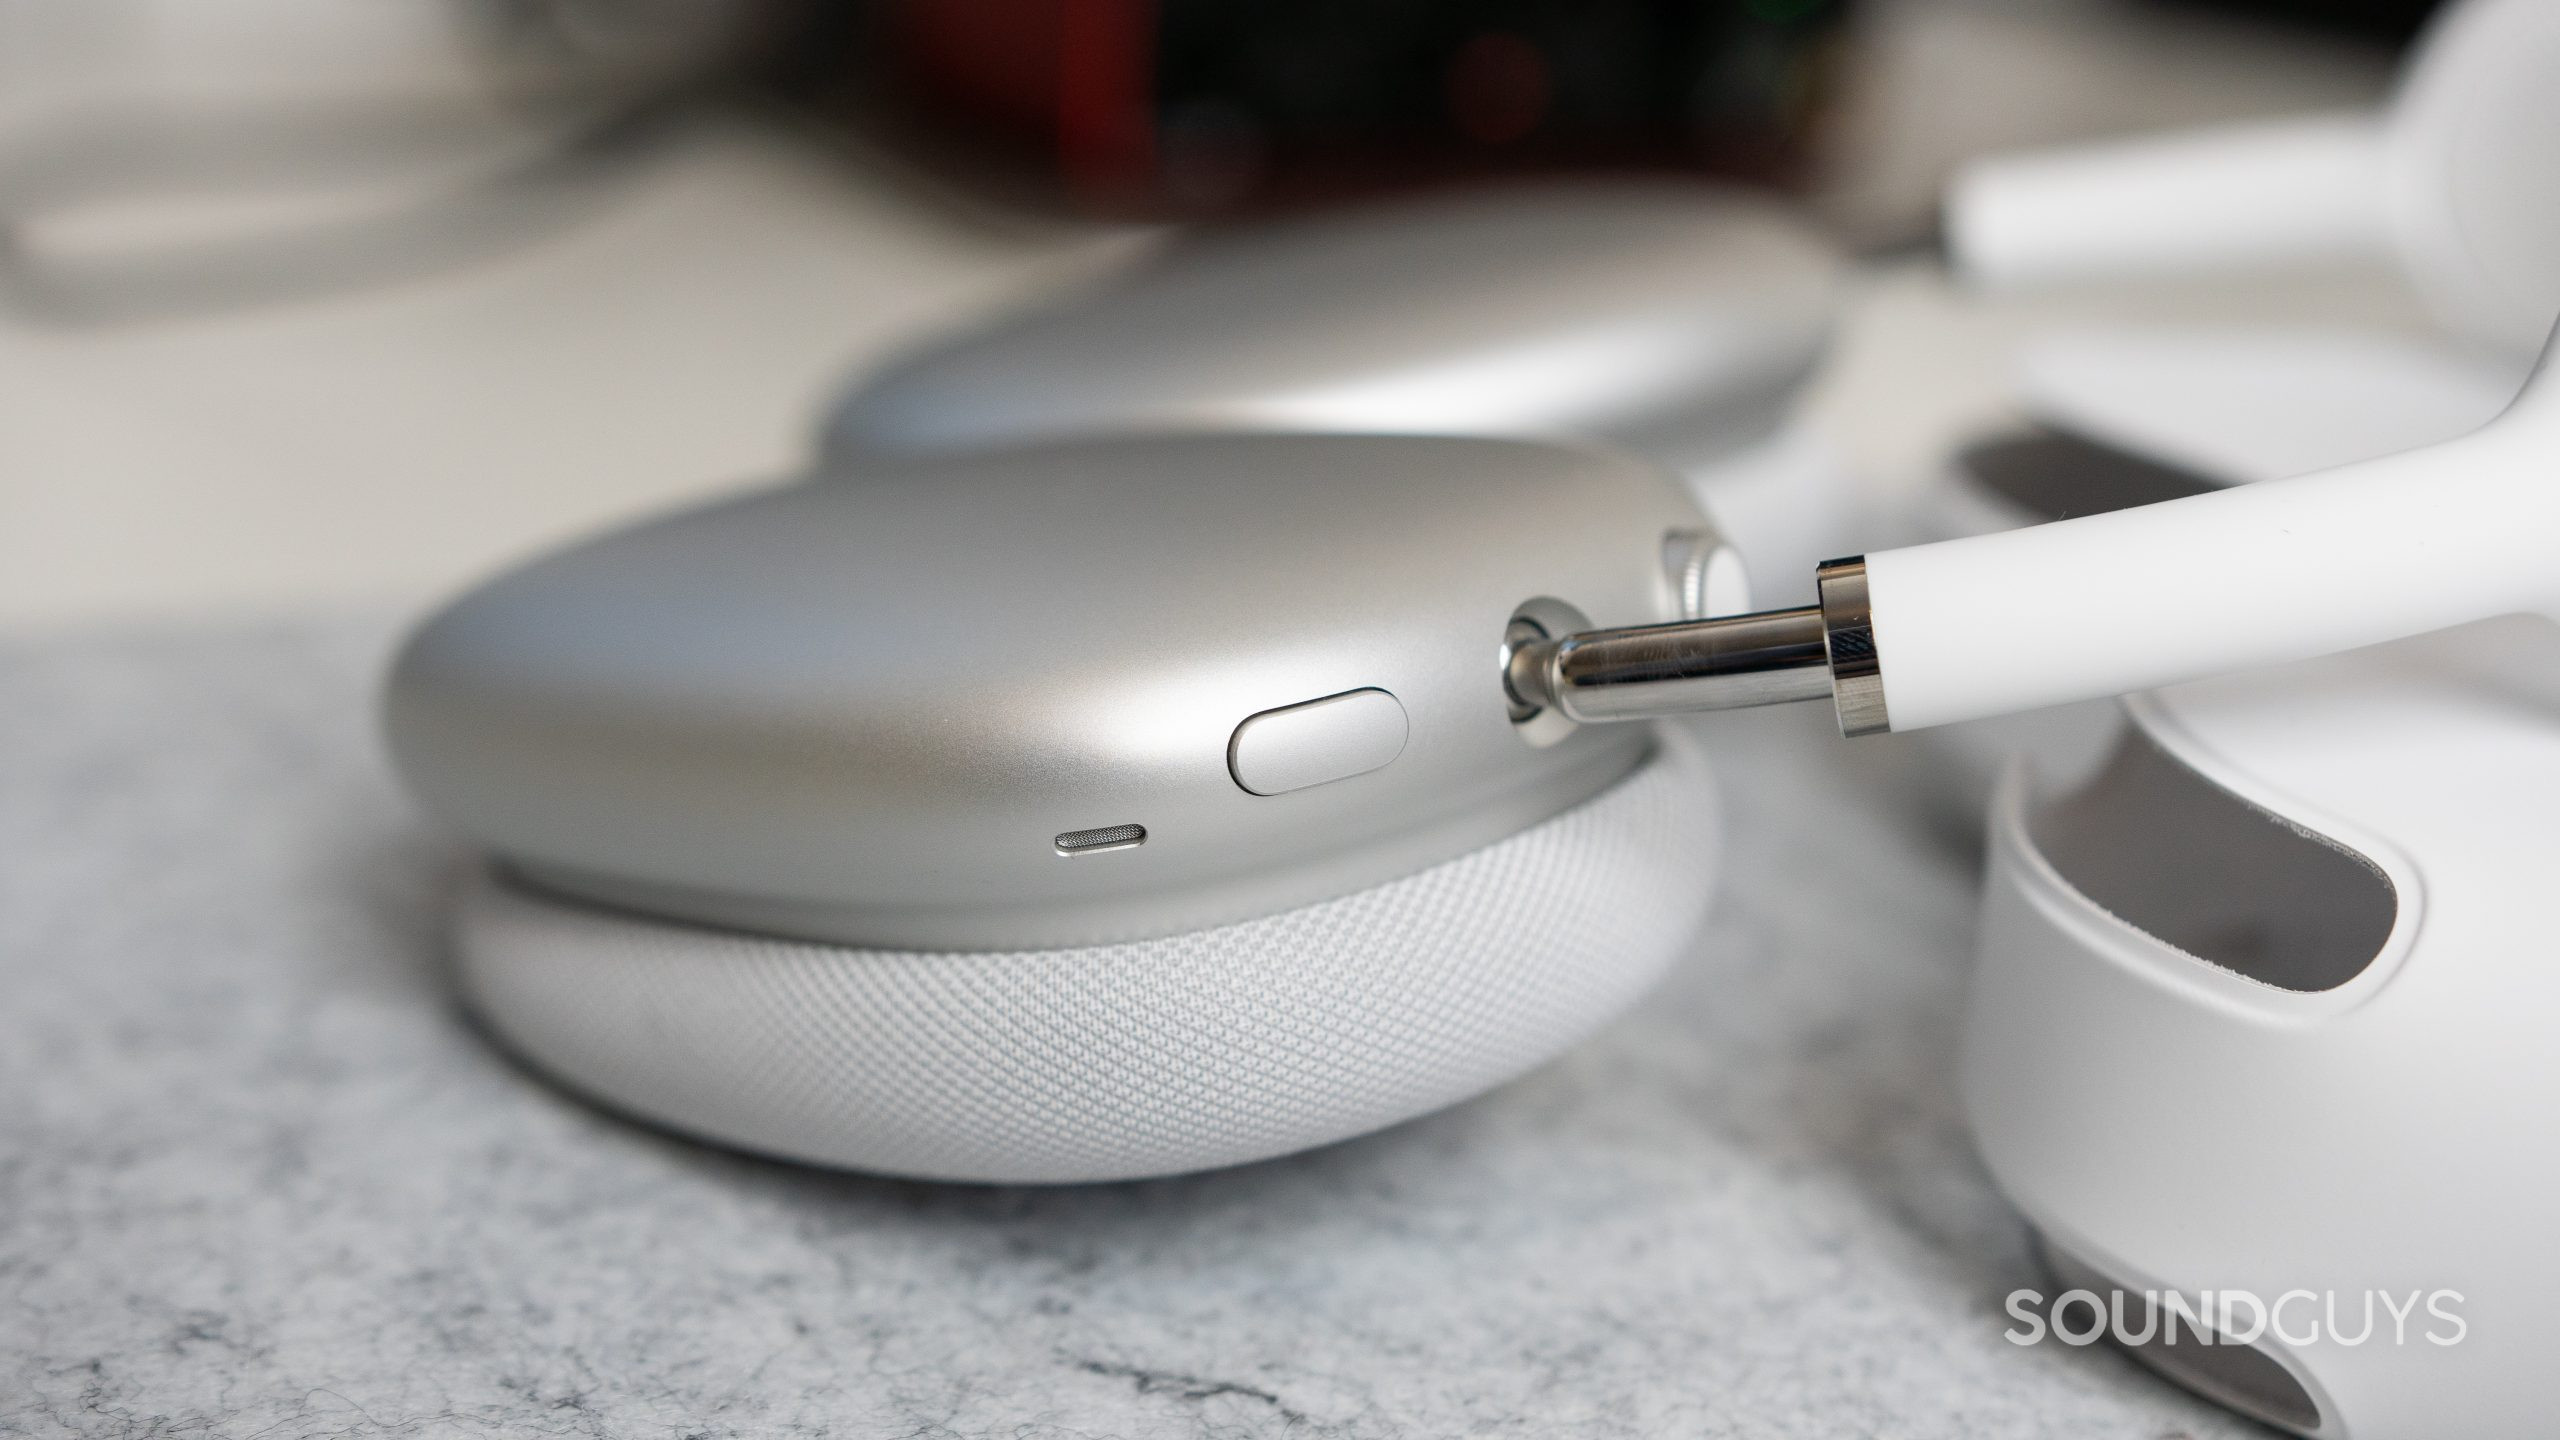 Apple AirPods Max First Look: Sensational Over-Ear Headphones With